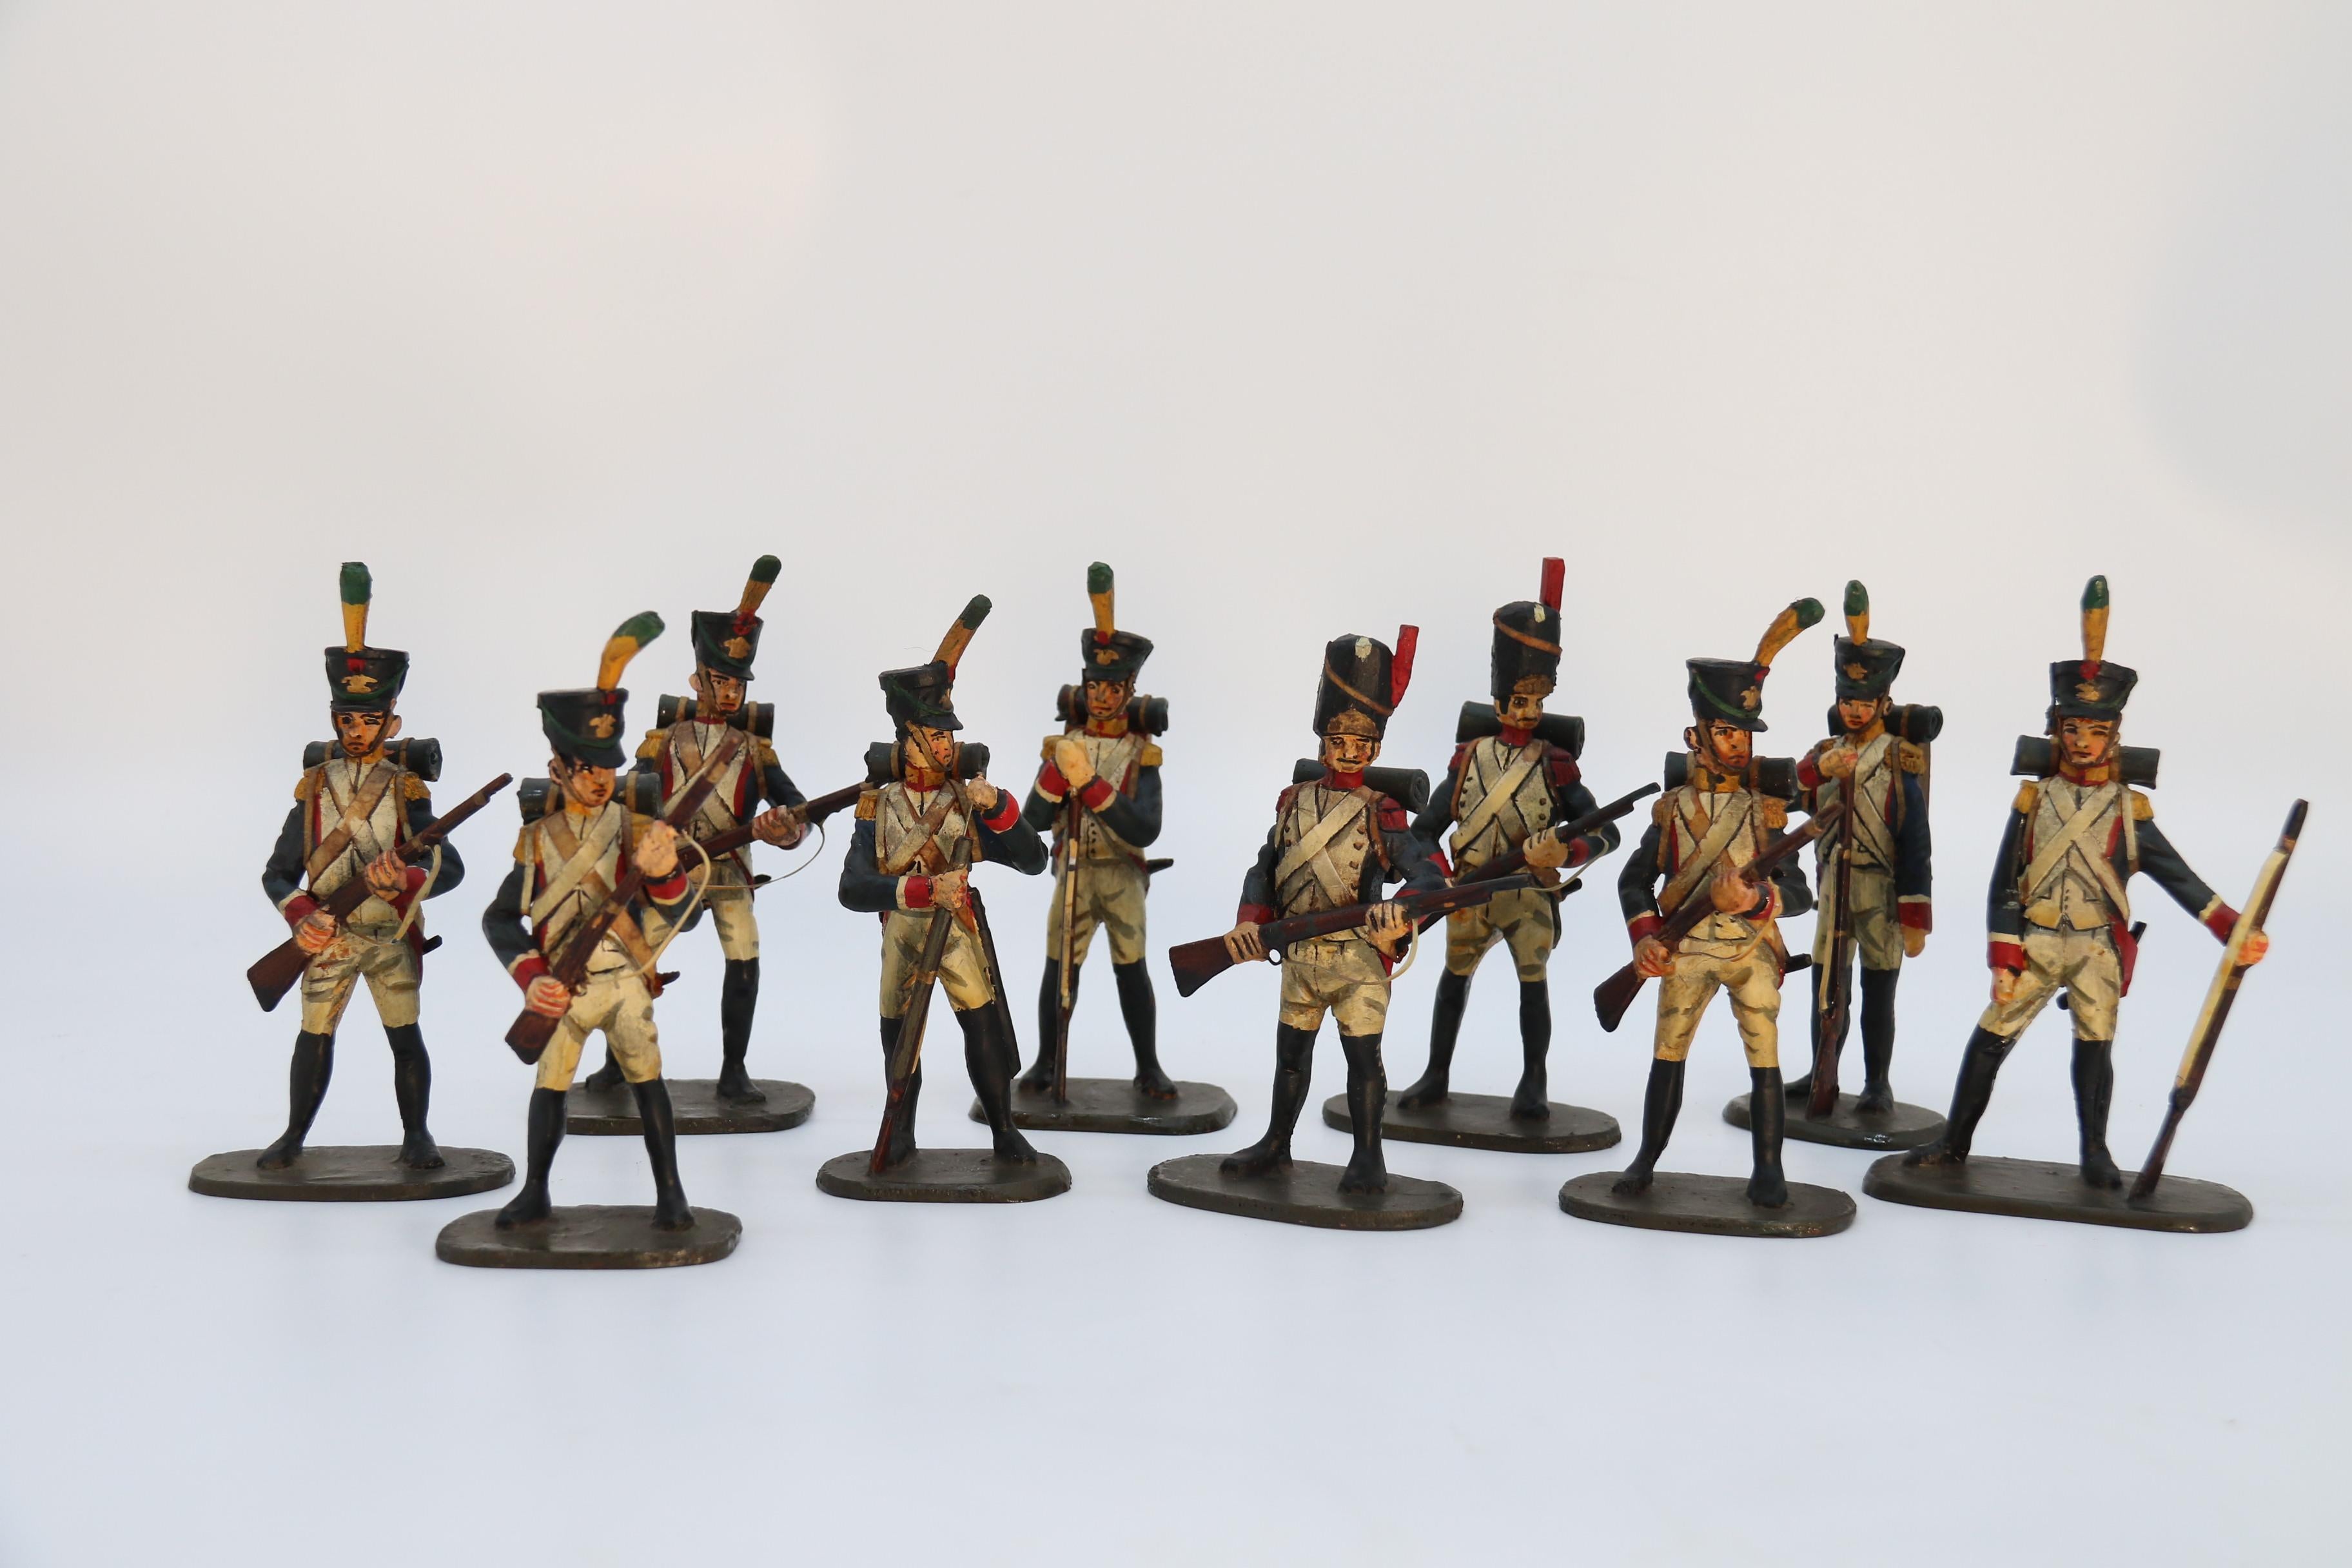 This very rare group of French Napoleonic period soldiers are completely handmade. They have each been finely carved in wood and then hand painted with great detail. Each soldier is portrayed in a different position wearing a full uniform with a